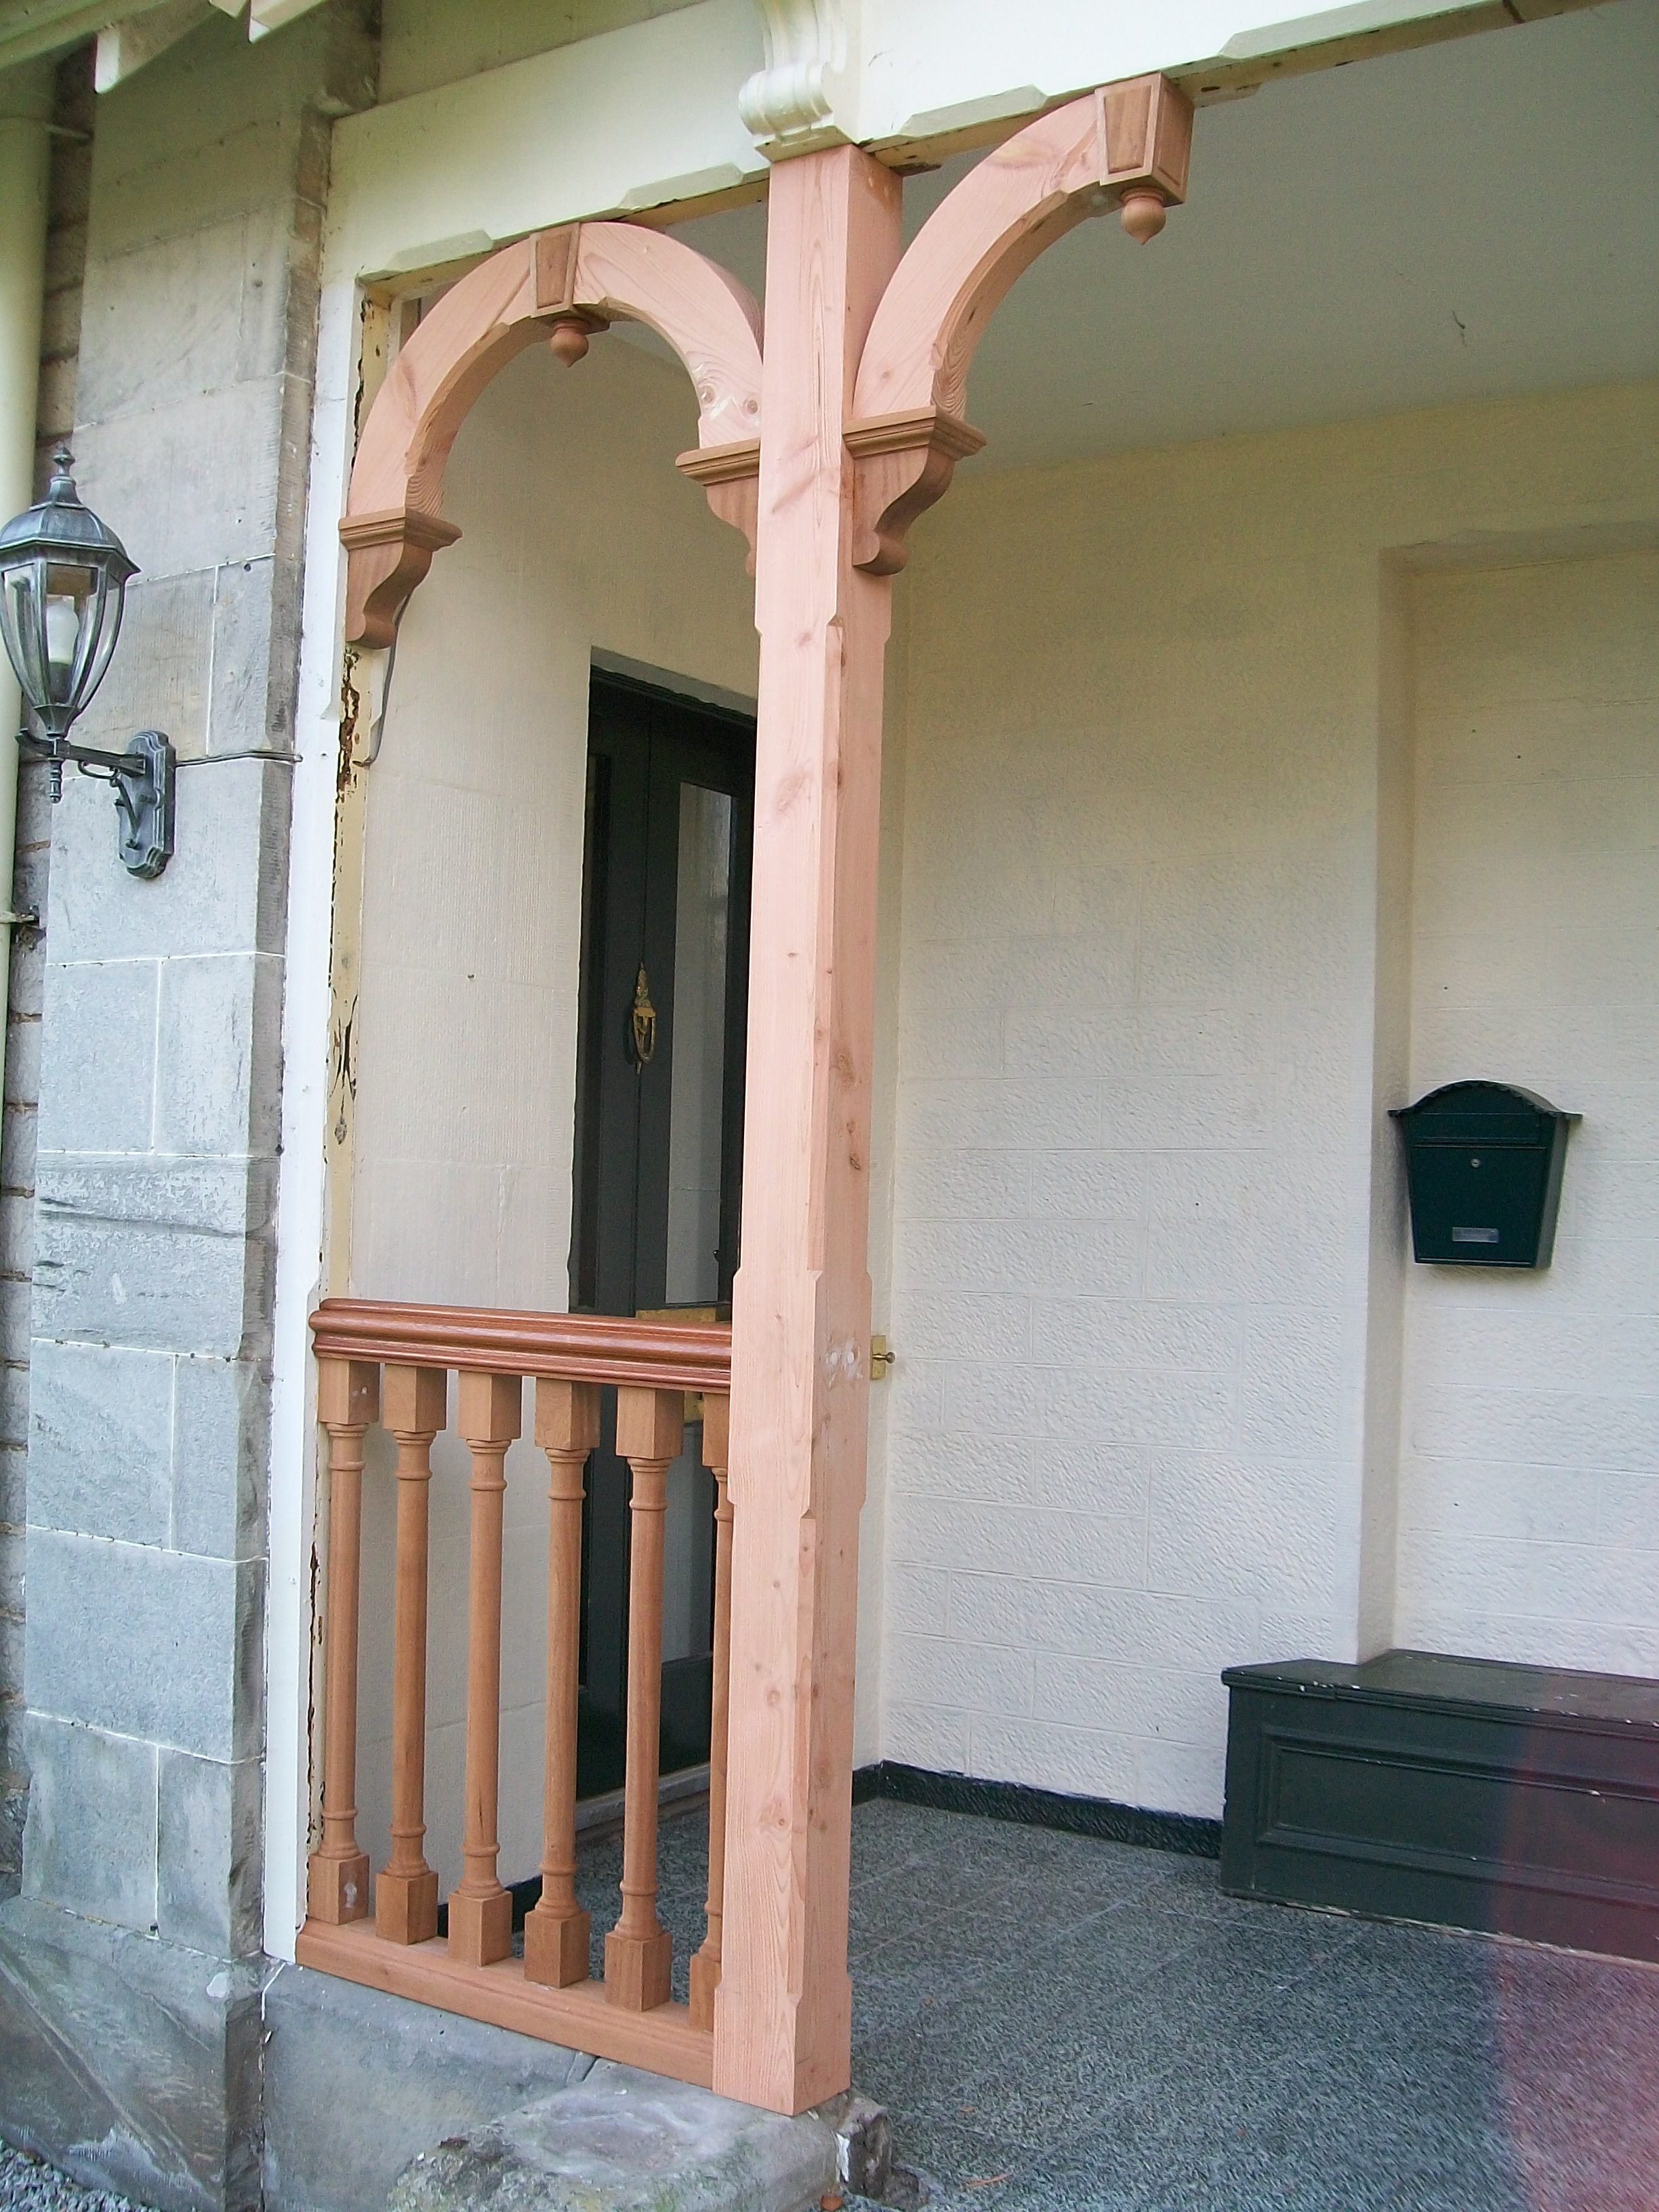 restoration joinery, Victorian joinery, handrail, spindles, baserail, custom made joinery, bespoke joinery, Scottish joinery, specialist joinery,